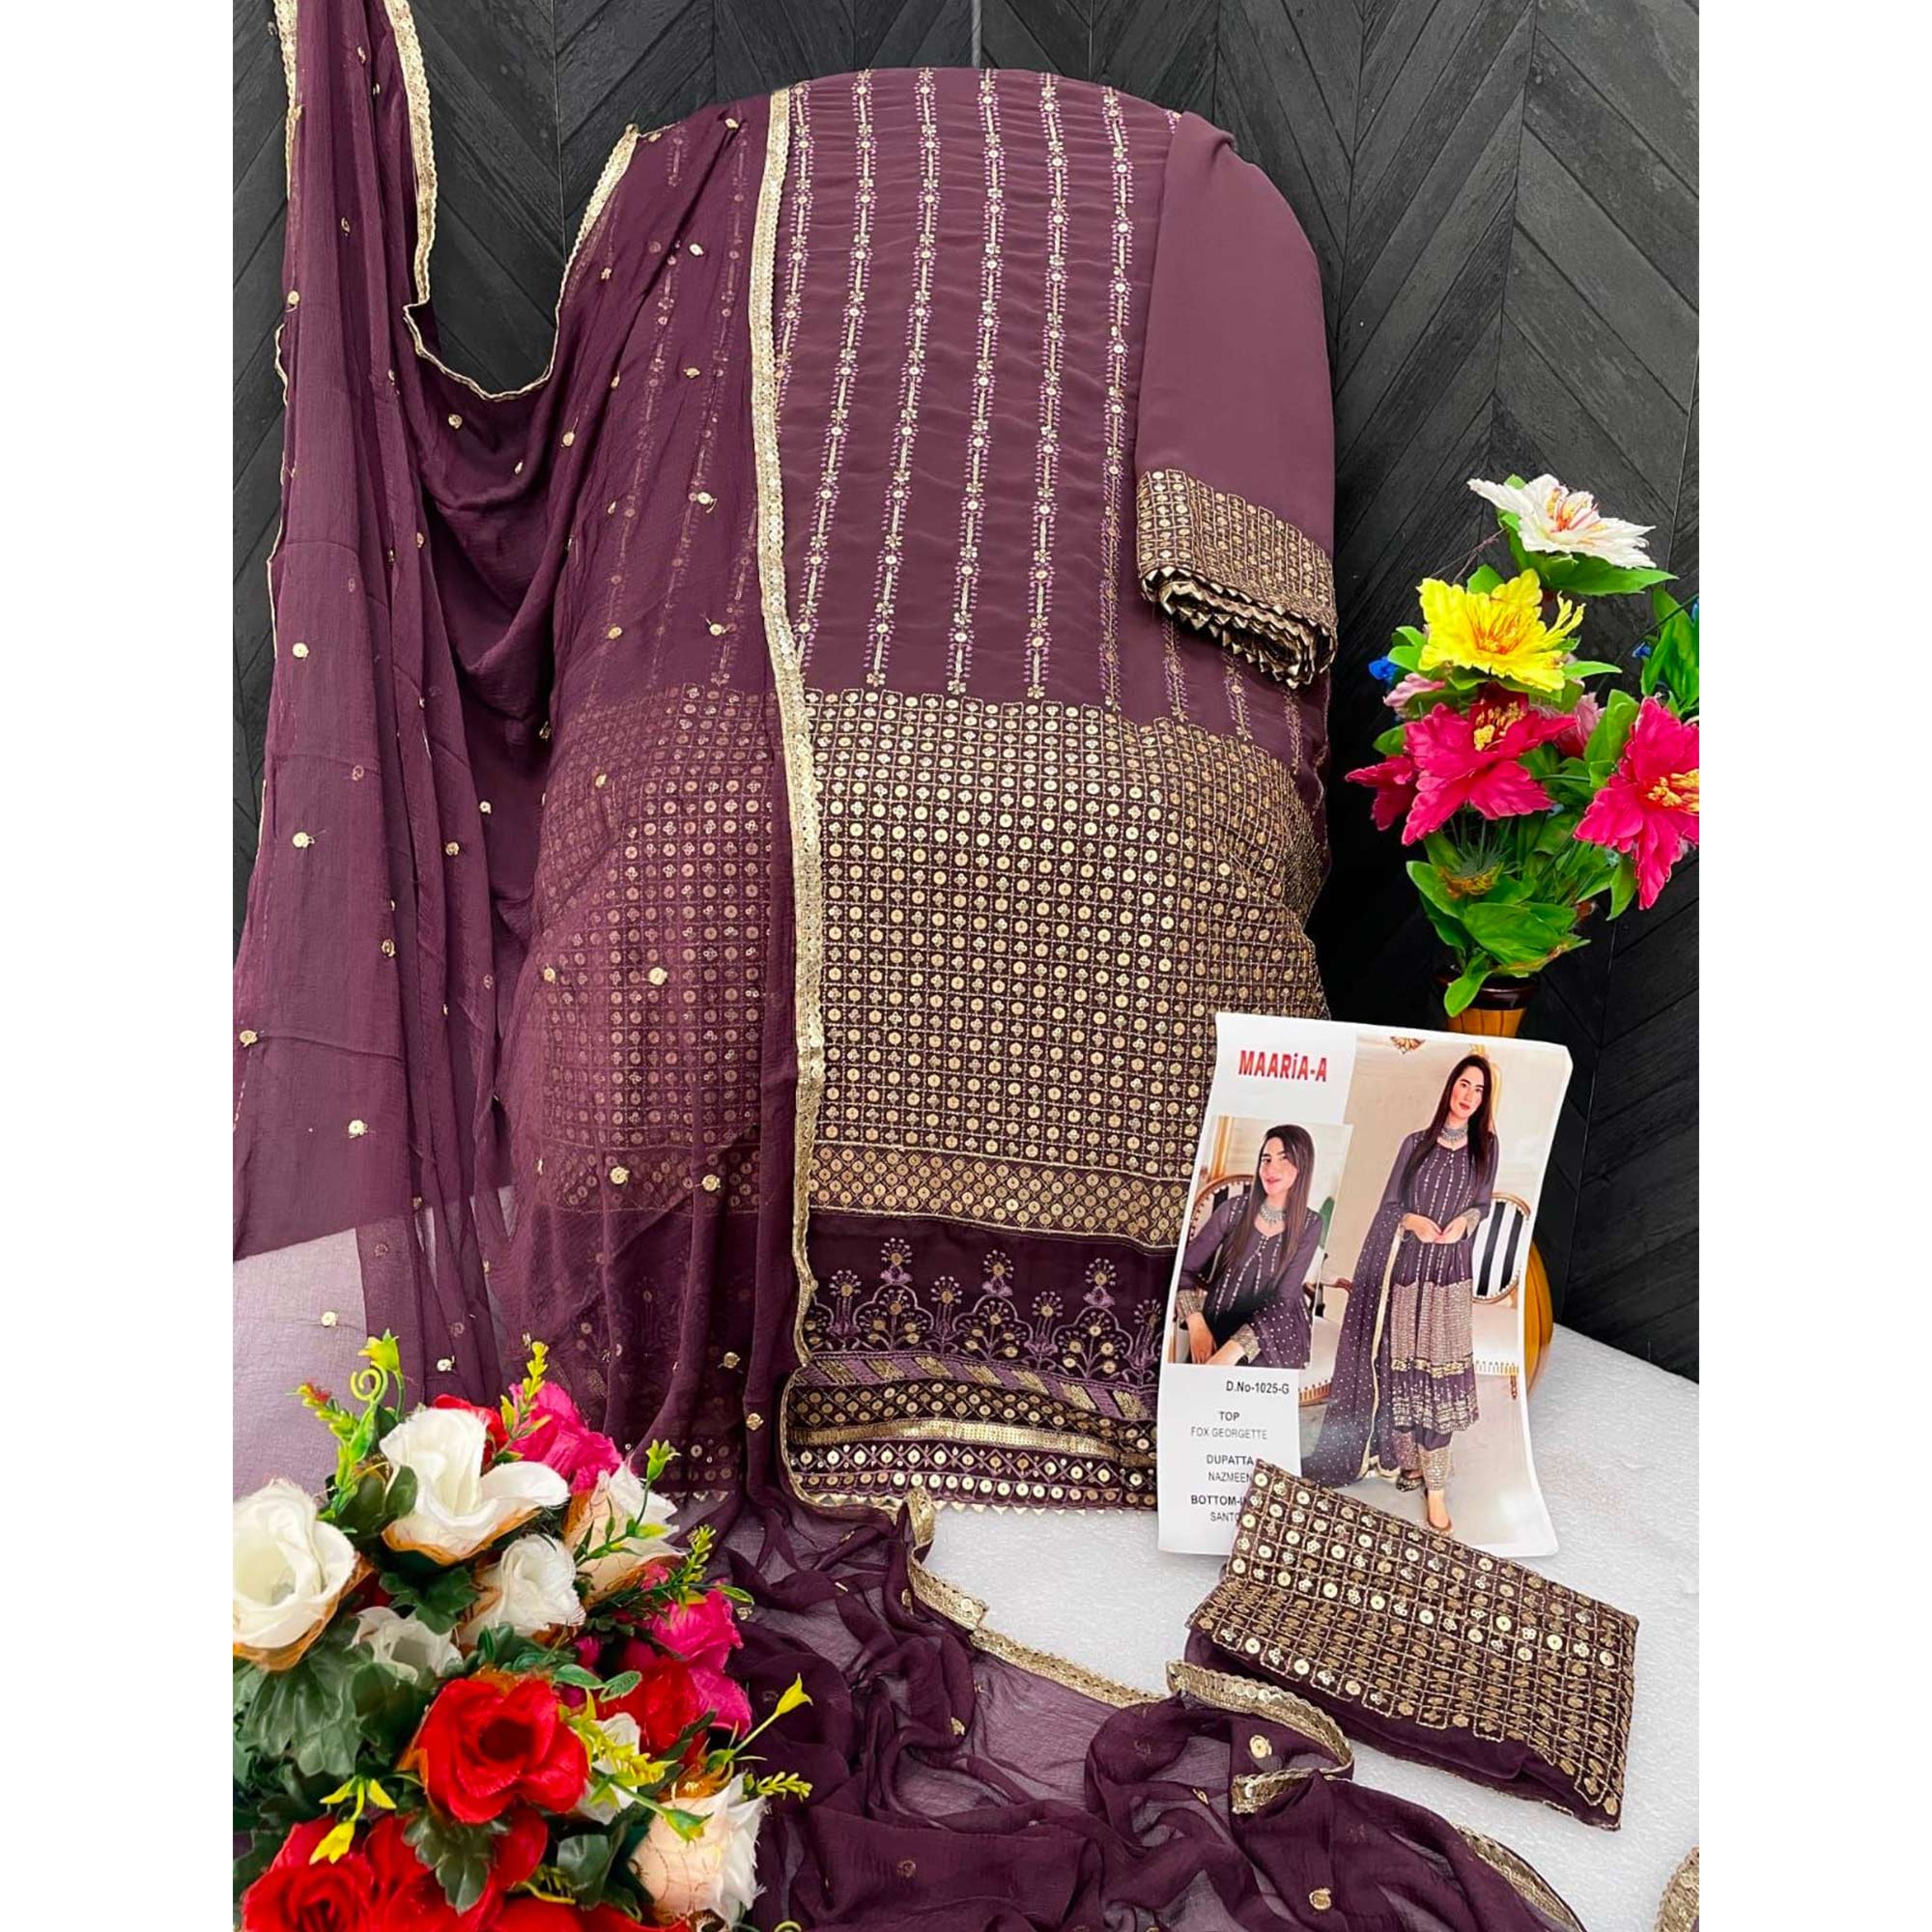 Mauve Sequins Embroidered Georgette Semi Stitched Salwar Suit